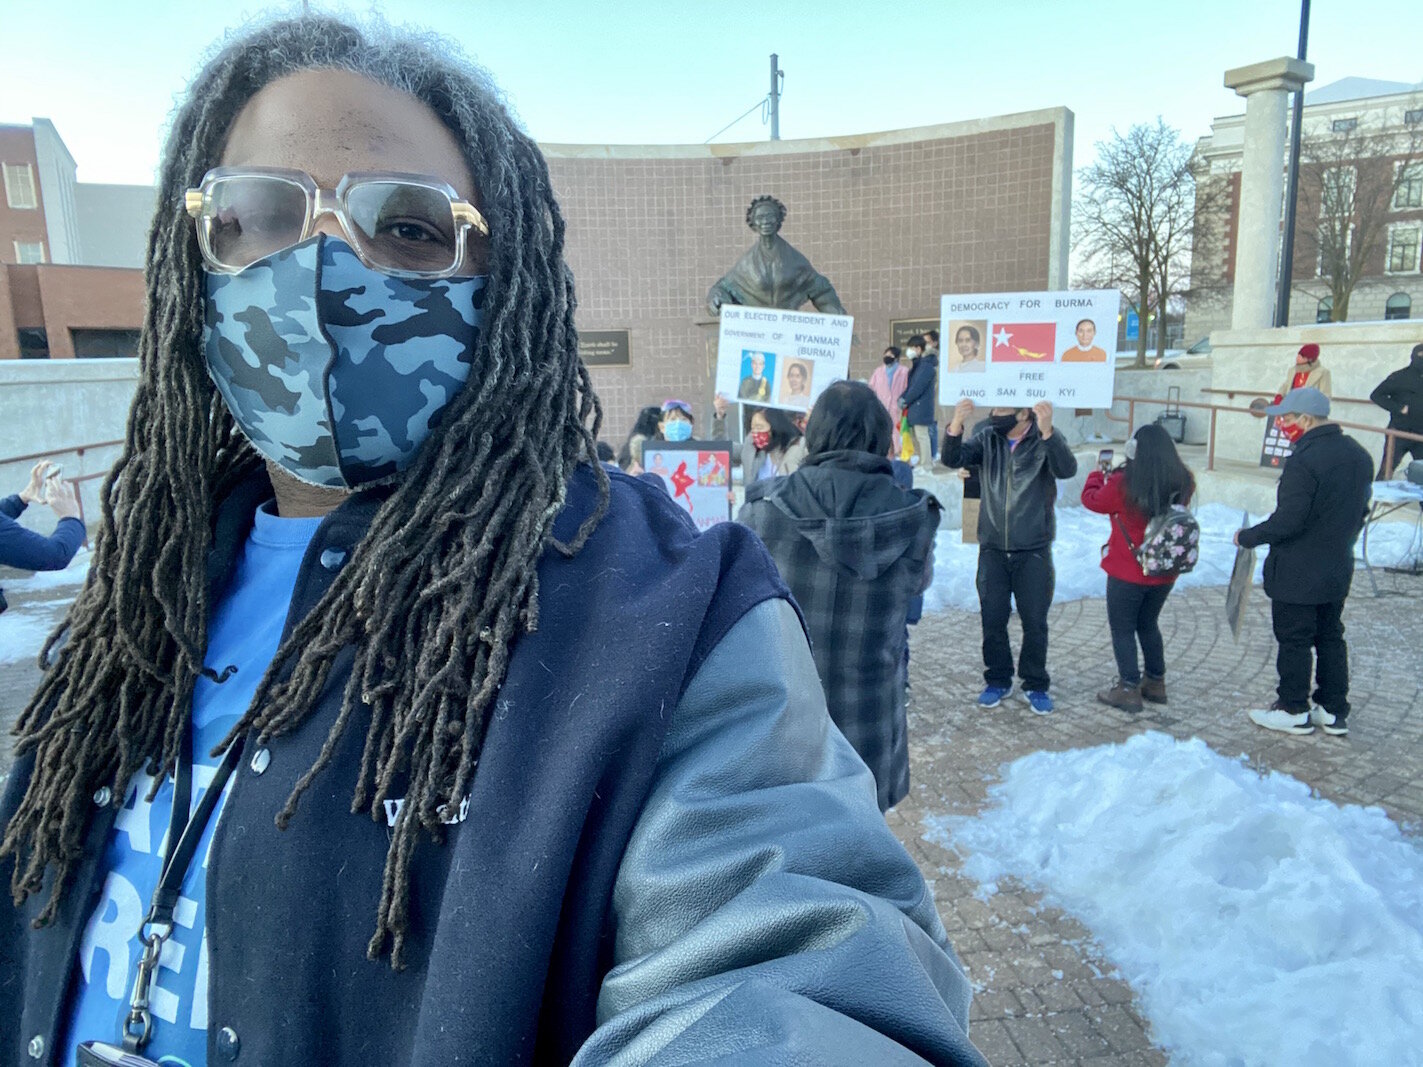 Jeffo Cotton covers the protest for On the Ground Battle Creek.